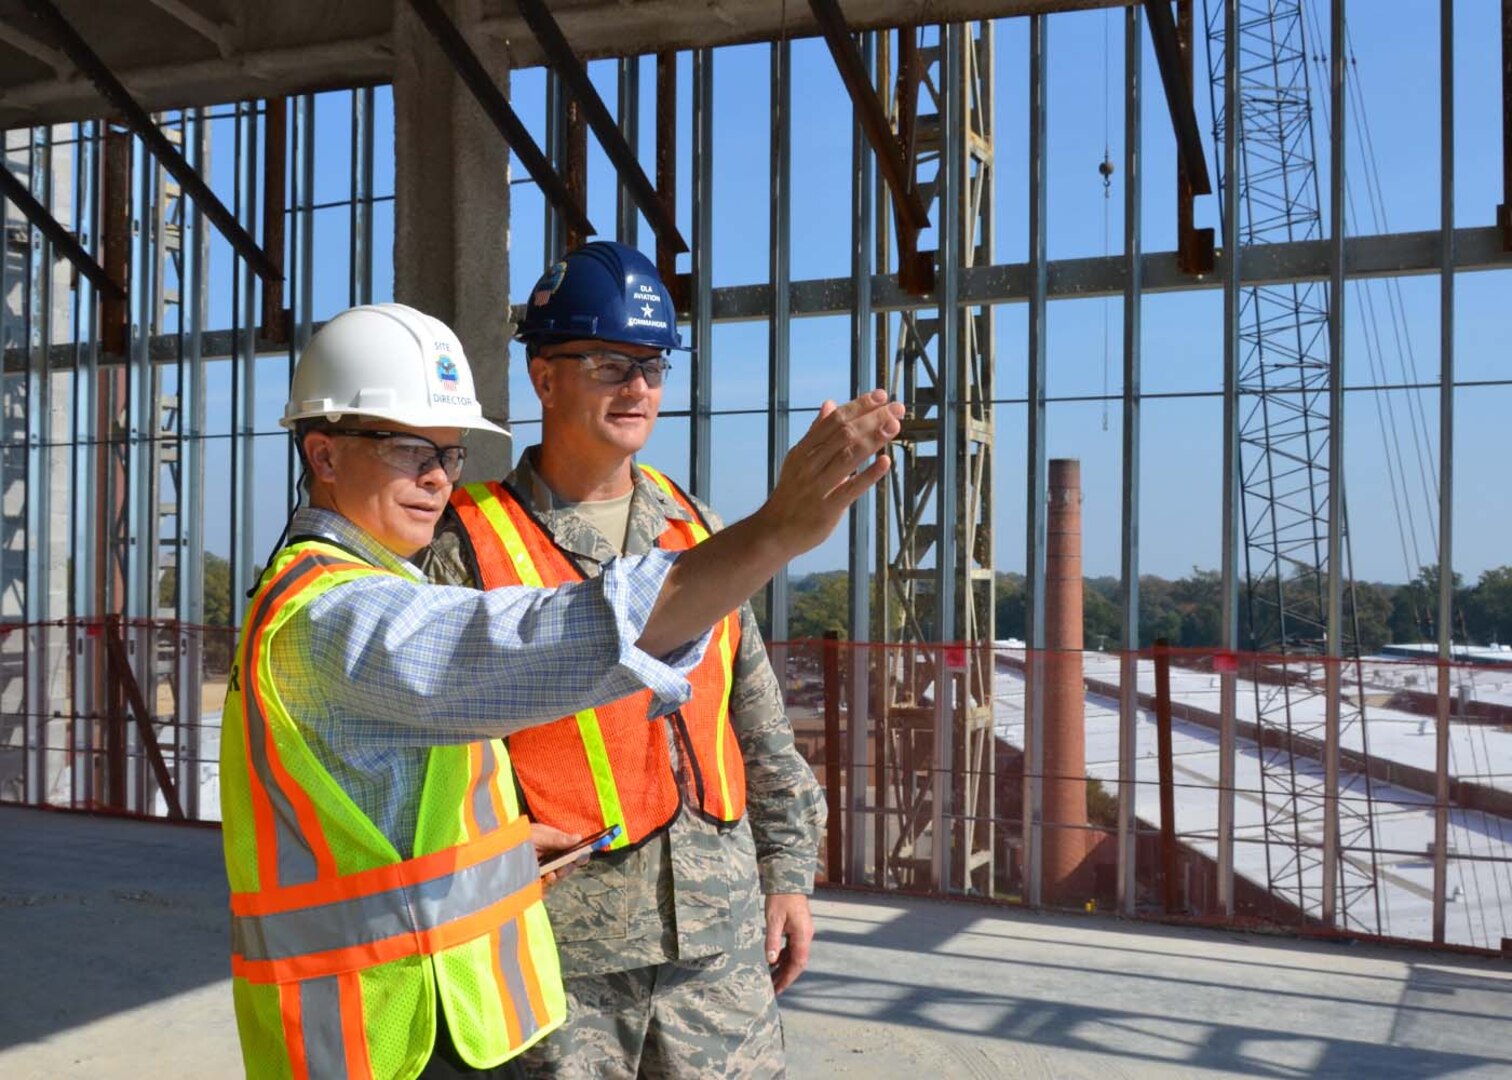 Defense Logistics Agency Aviation Commander Air Force Brig. Gen. Allan Day, and DLA Installation Support at Richmond Site Director David Gibson, tour the construction site on Phase I of the DLA Aviation Operations Center being constructed on Defense Supply Center Richmond, Virginia, Nov. 3, 2016.